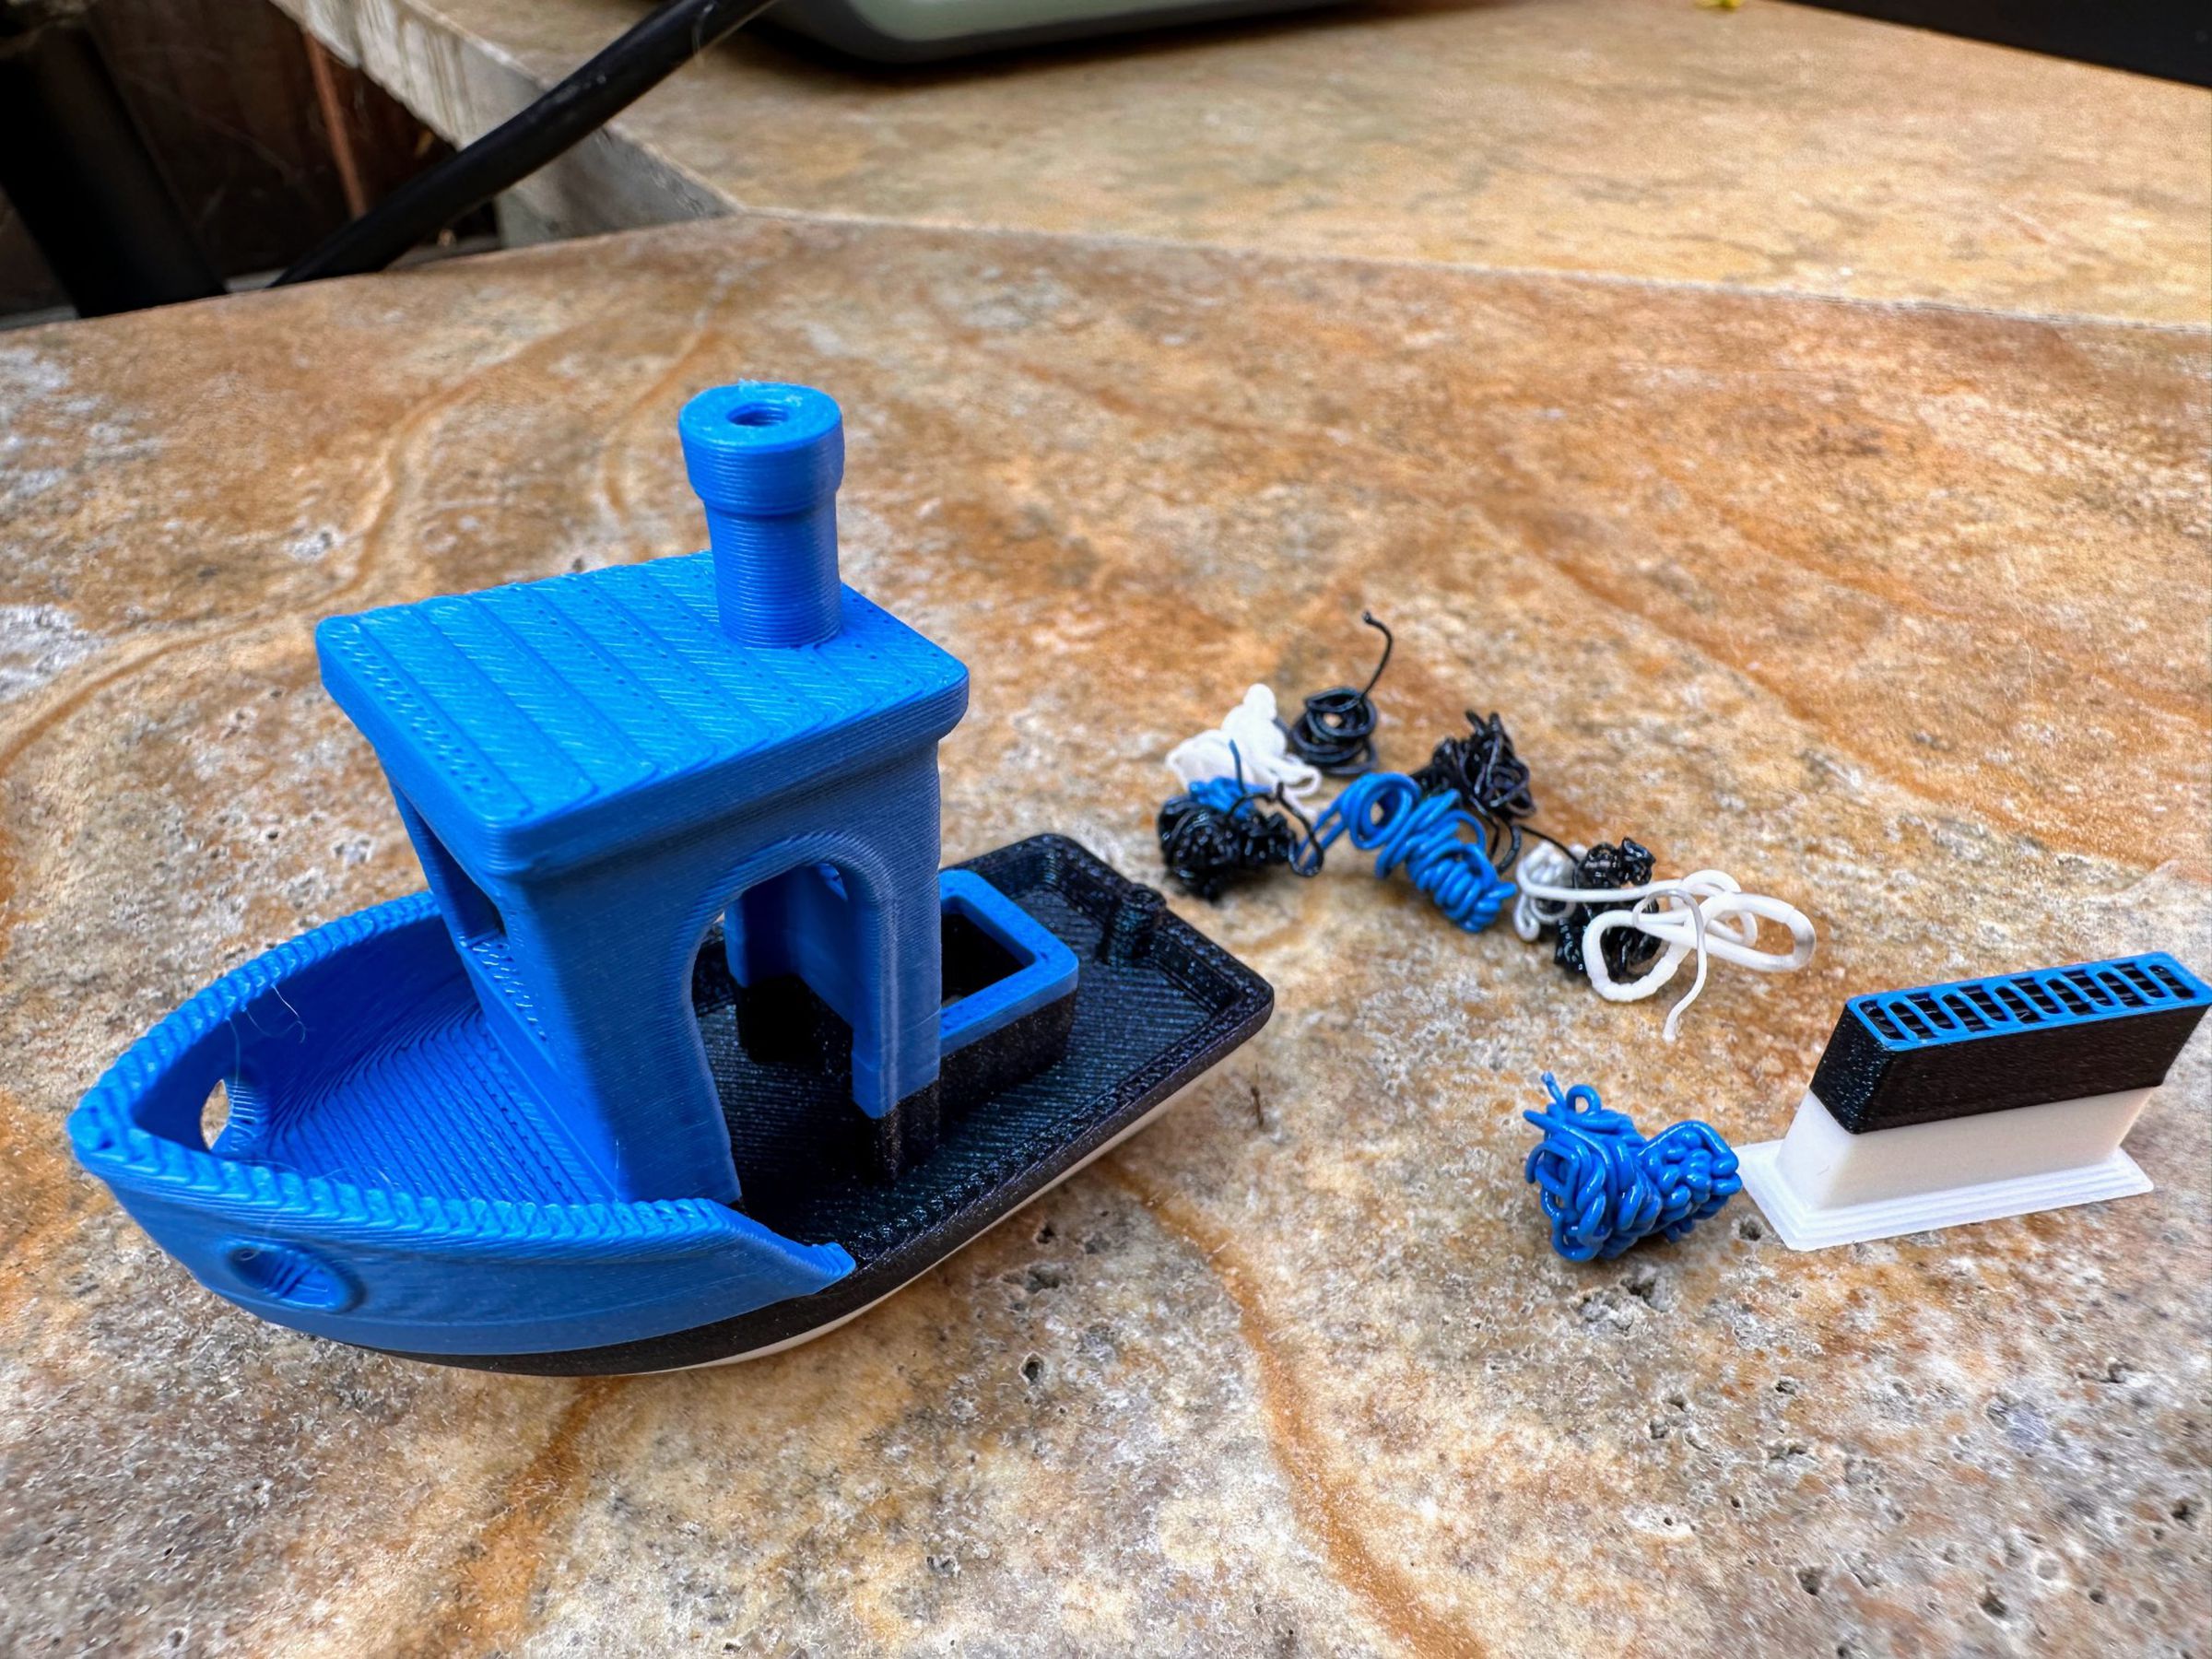 Here’s how much plastic a Benchy used in total.